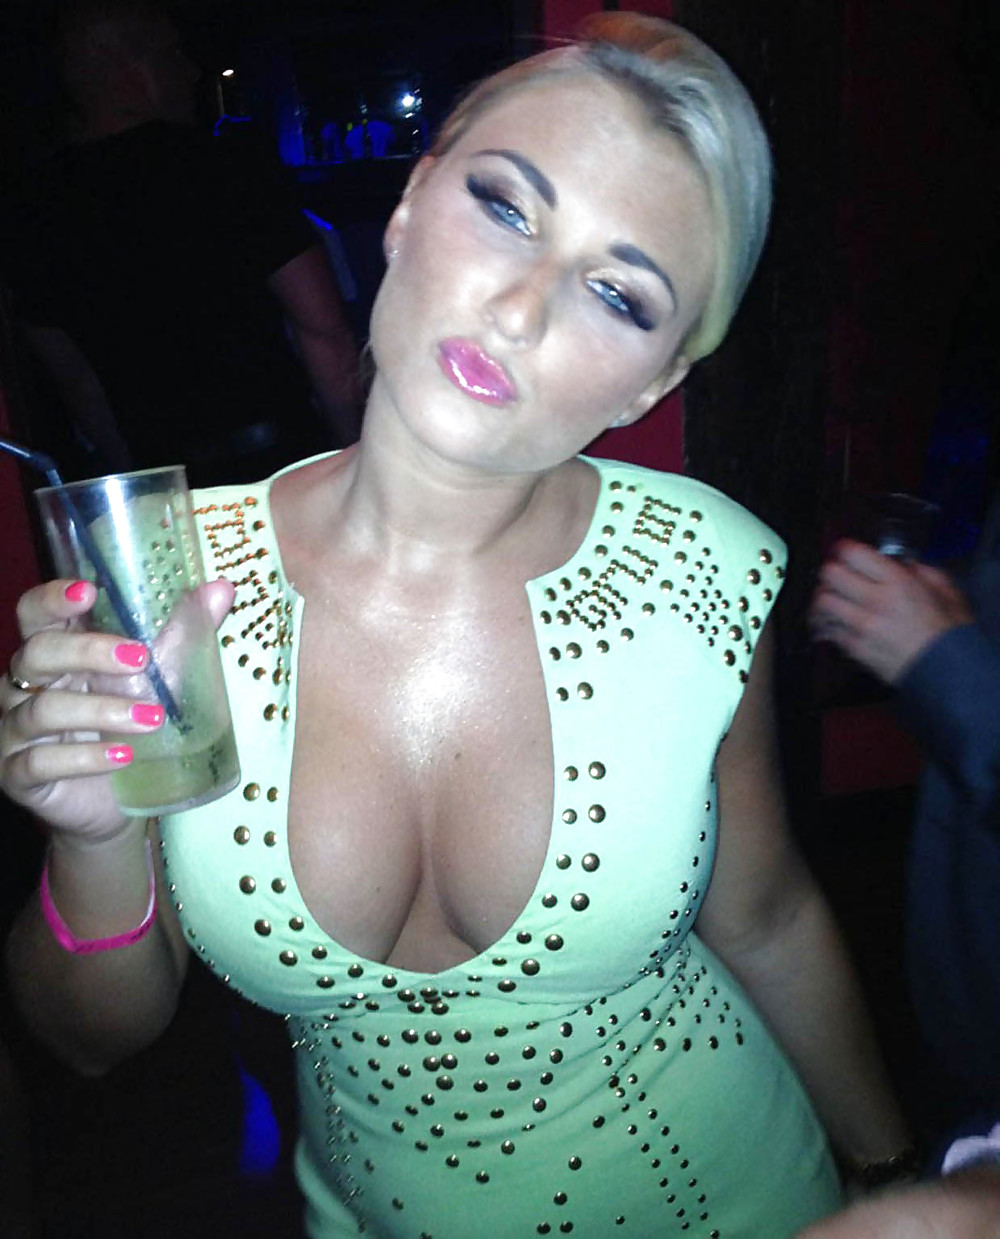 Billie Faiers - Is my Kind of Woman